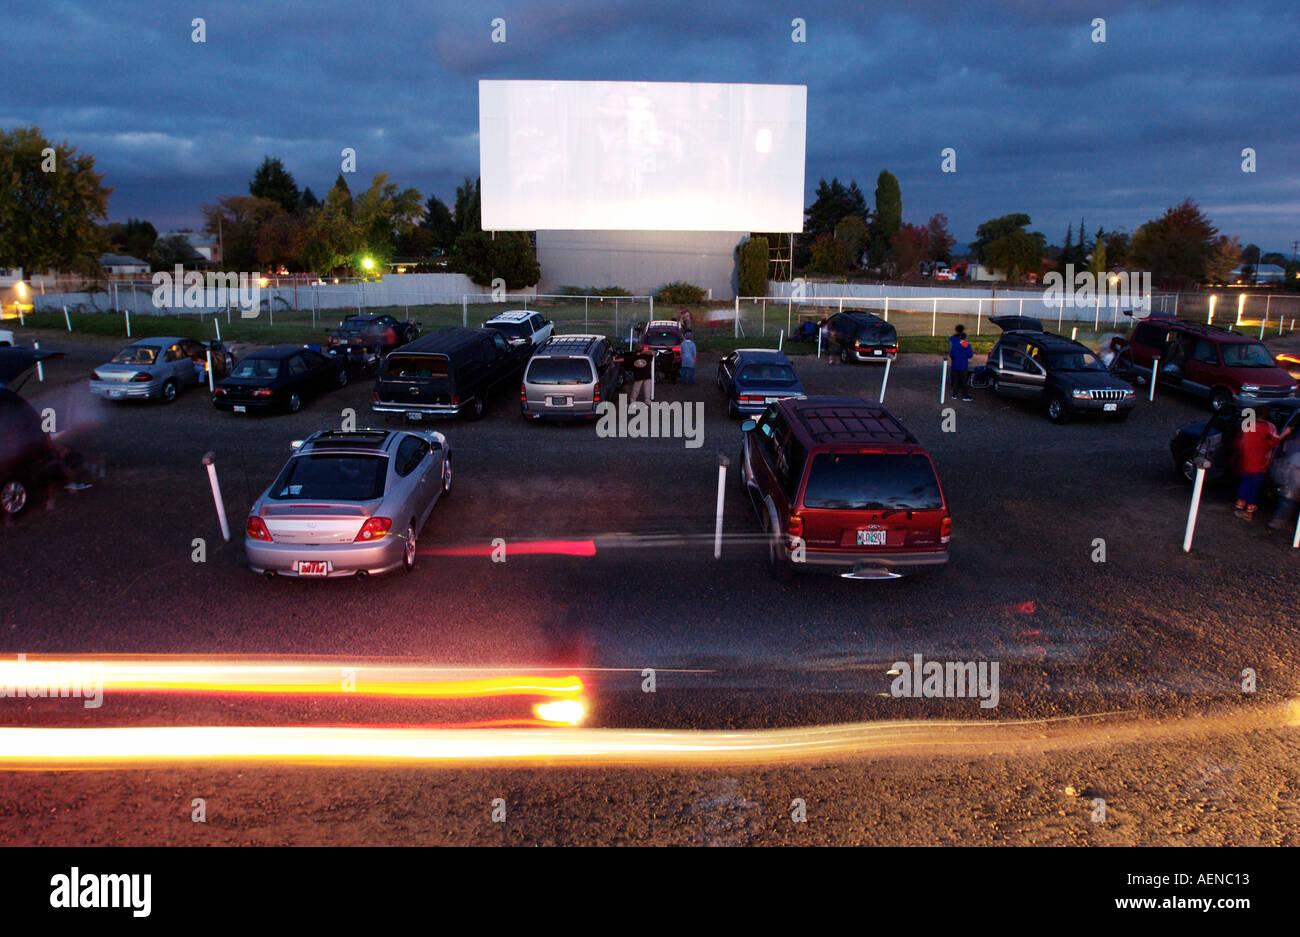 51 HQ Photos Drive In Movie Theater Oregon Pamplin Media Group A